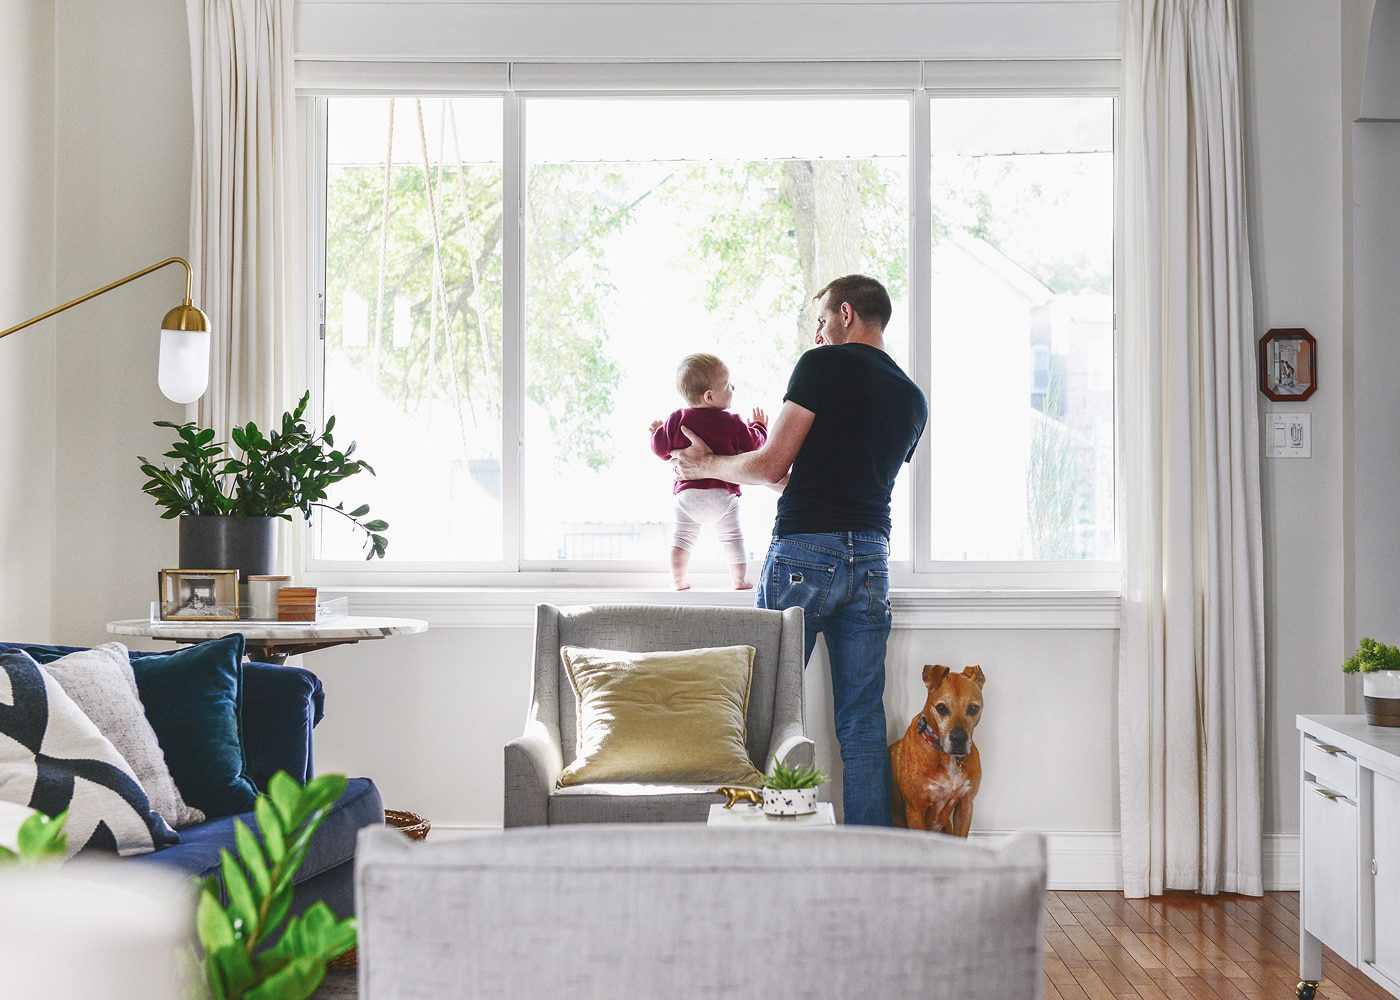 Window safety month | choose cordless window treatments for family safety | via Yellow Brick Home